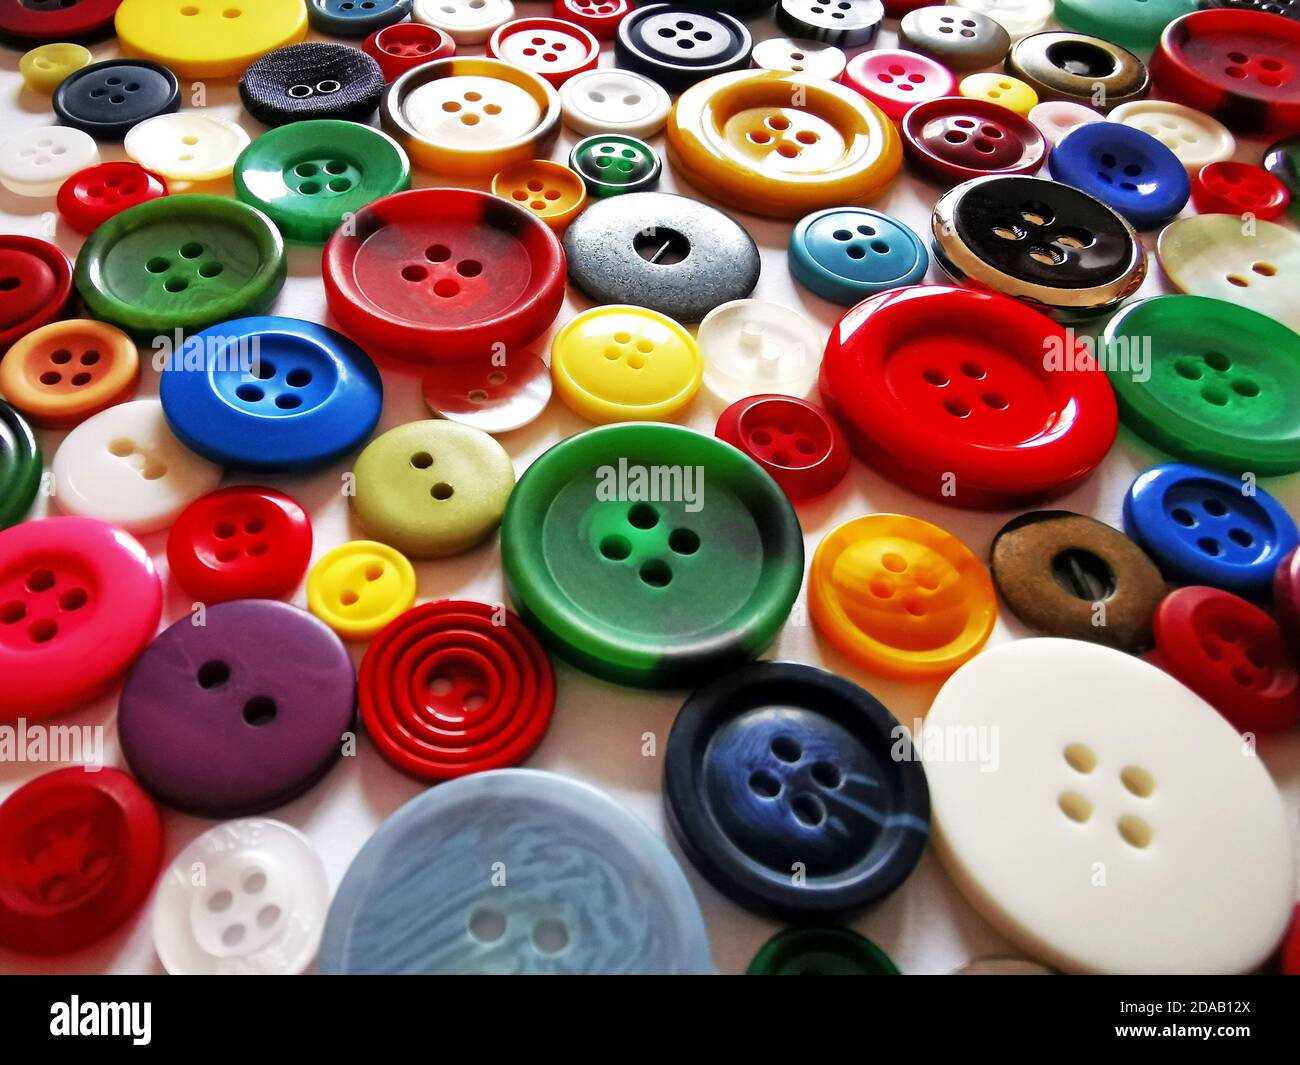 close-up of a great variety of buttons in many colors and sizes, diversity concept Stock Photo